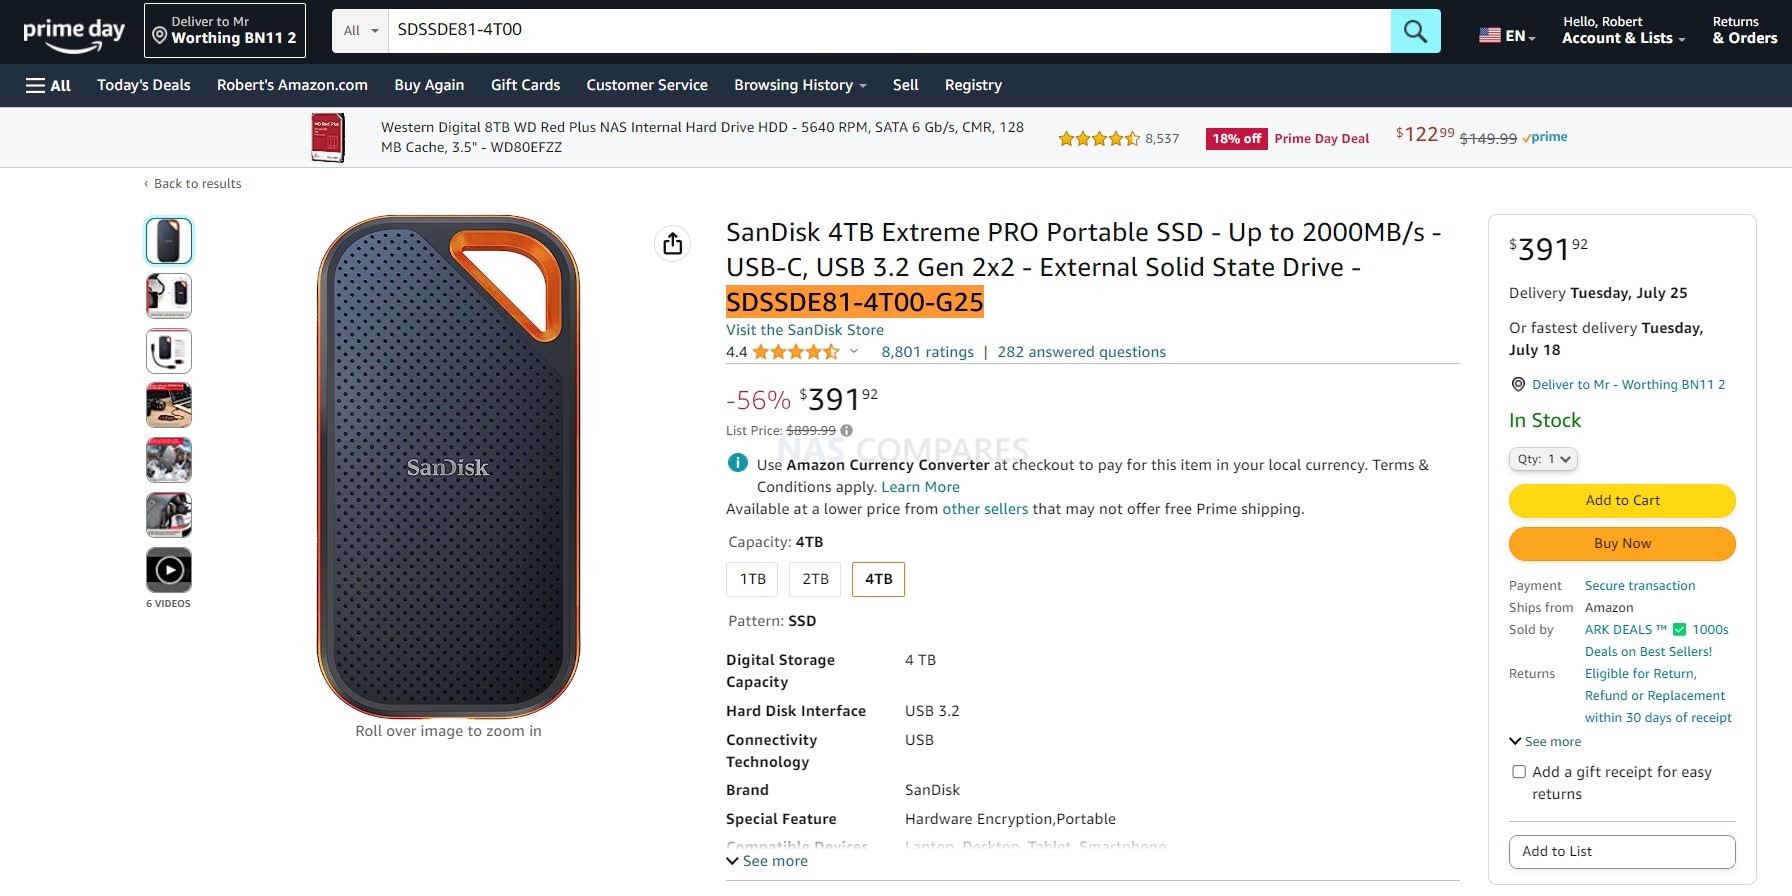 Check your SSDs: What to know about the SanDisk/Western Digital data loss  disaster